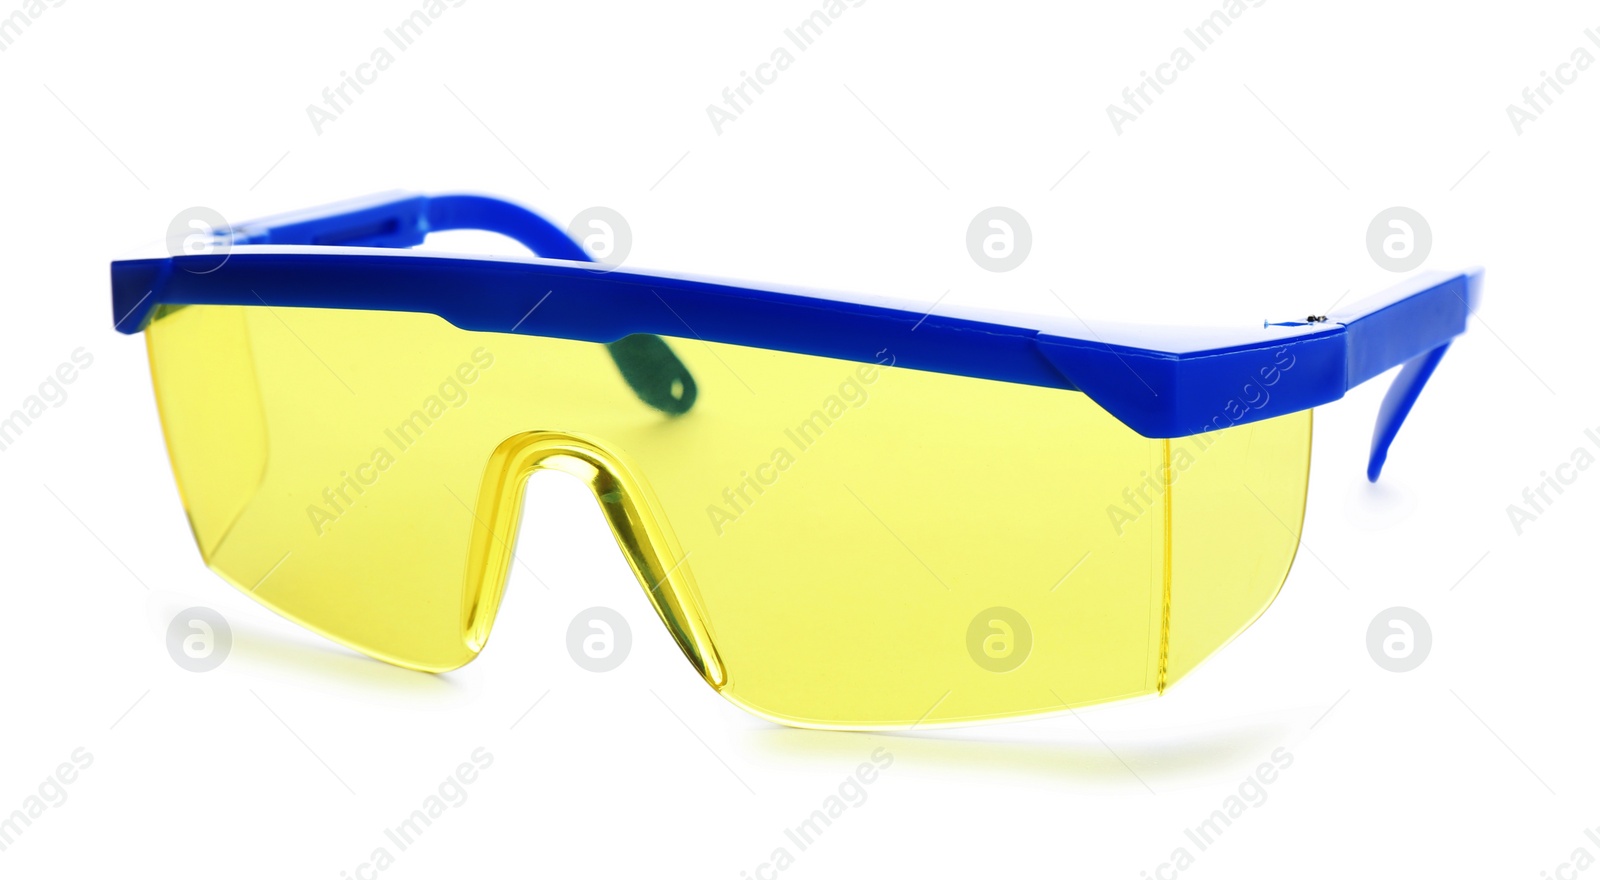 Photo of Protective goggles on white background. Safety equipment